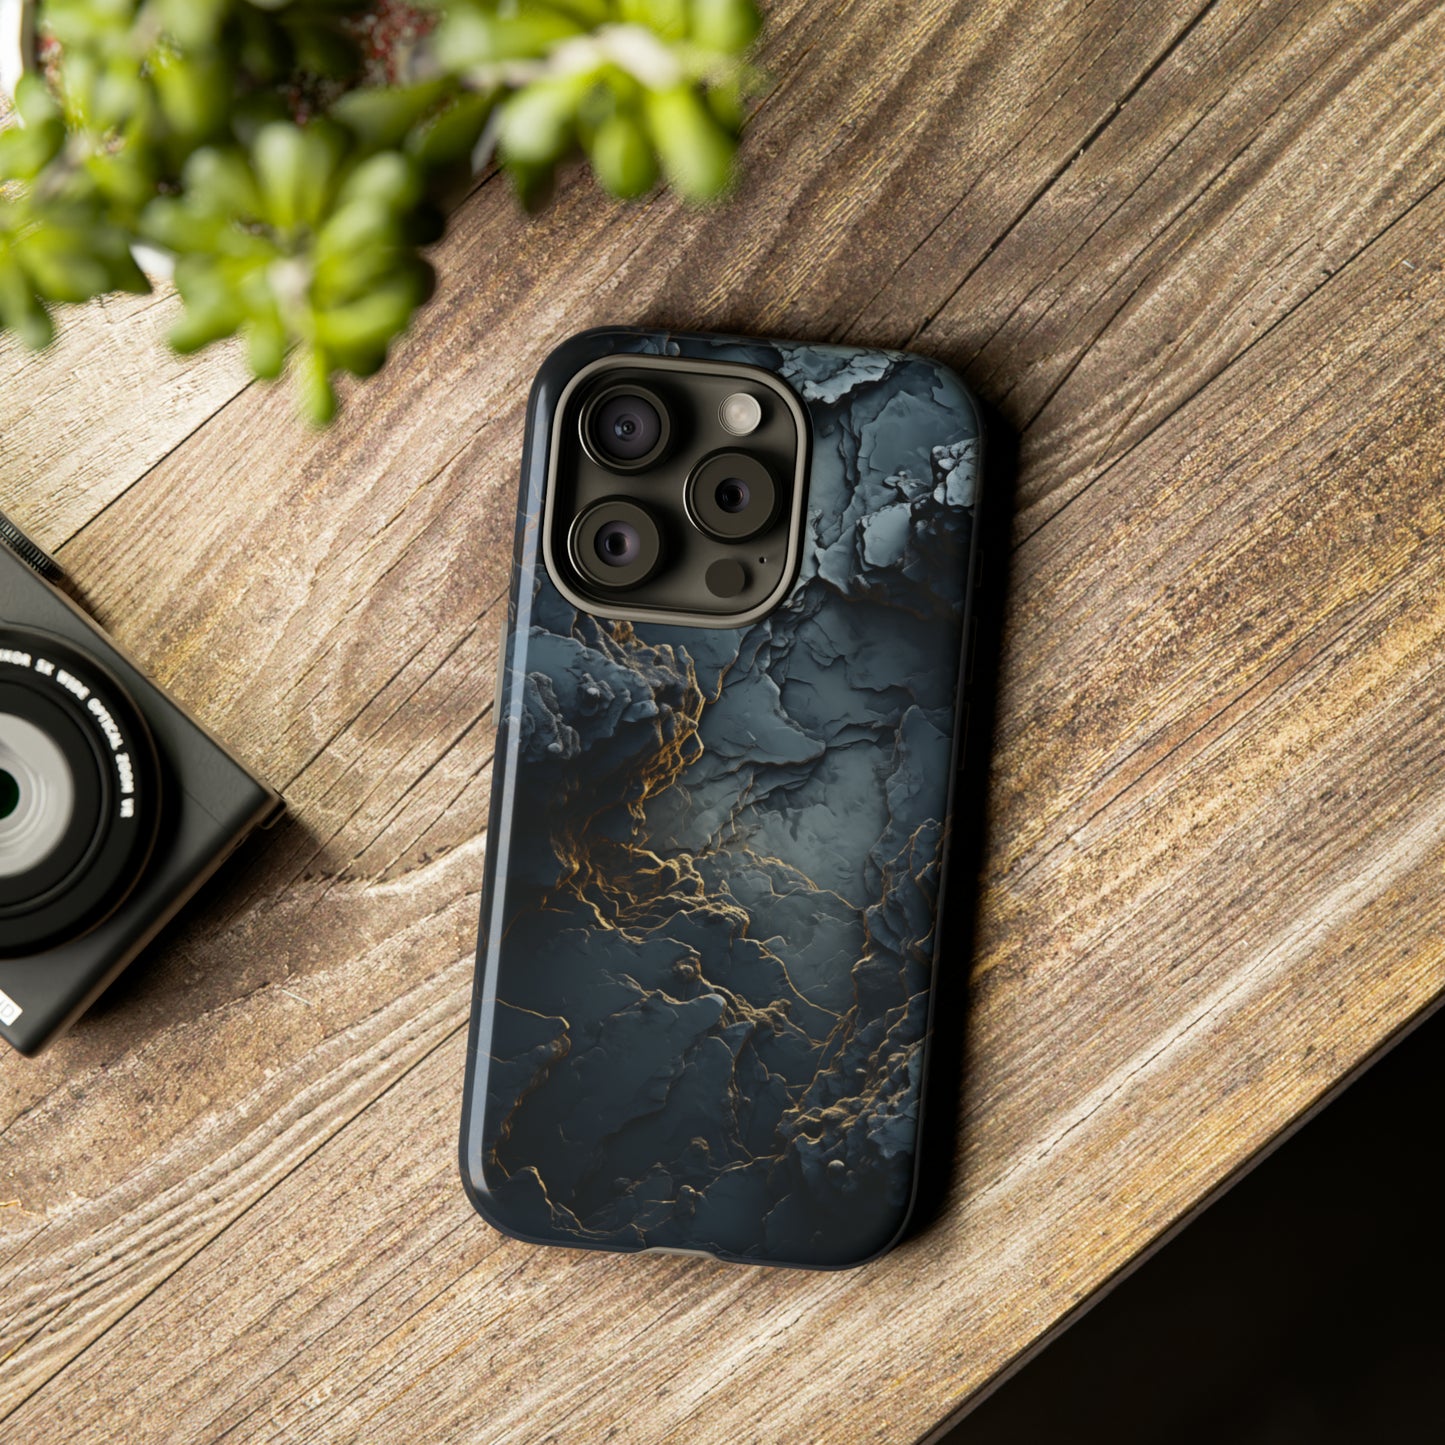 Earthen Gold Veins Dark Slate Phone Case - sedimentary rock formations - Samsung Galaxy S23, iPhone 15, Google Pixel 7 - Abstract Landscape